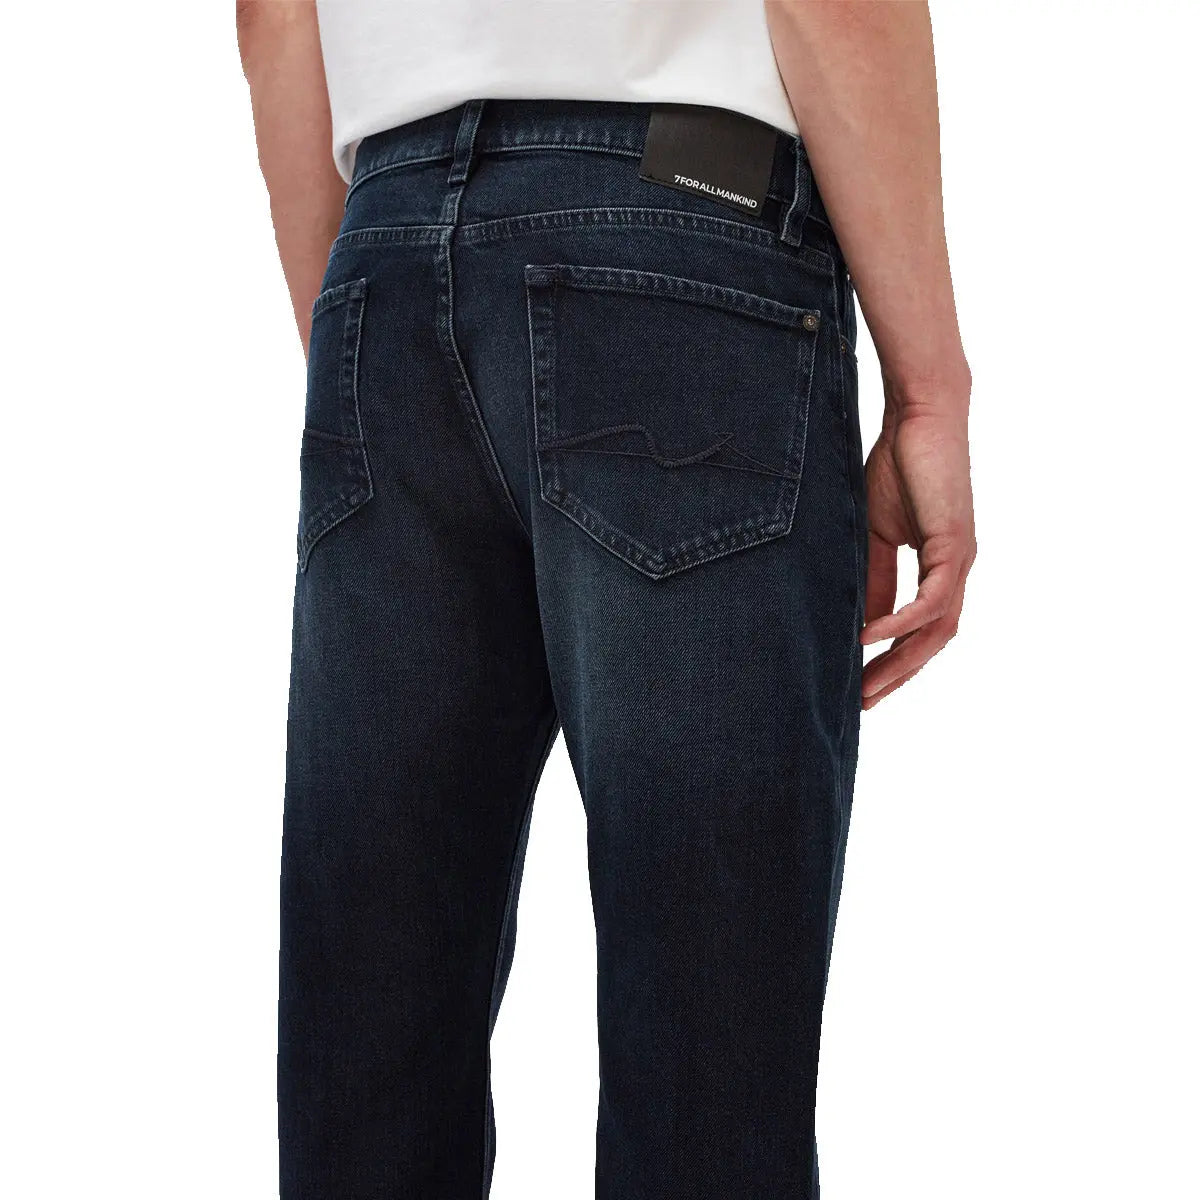 Black-Blue Every Day Denim Slimmy Jeans  7 For All Mankind   